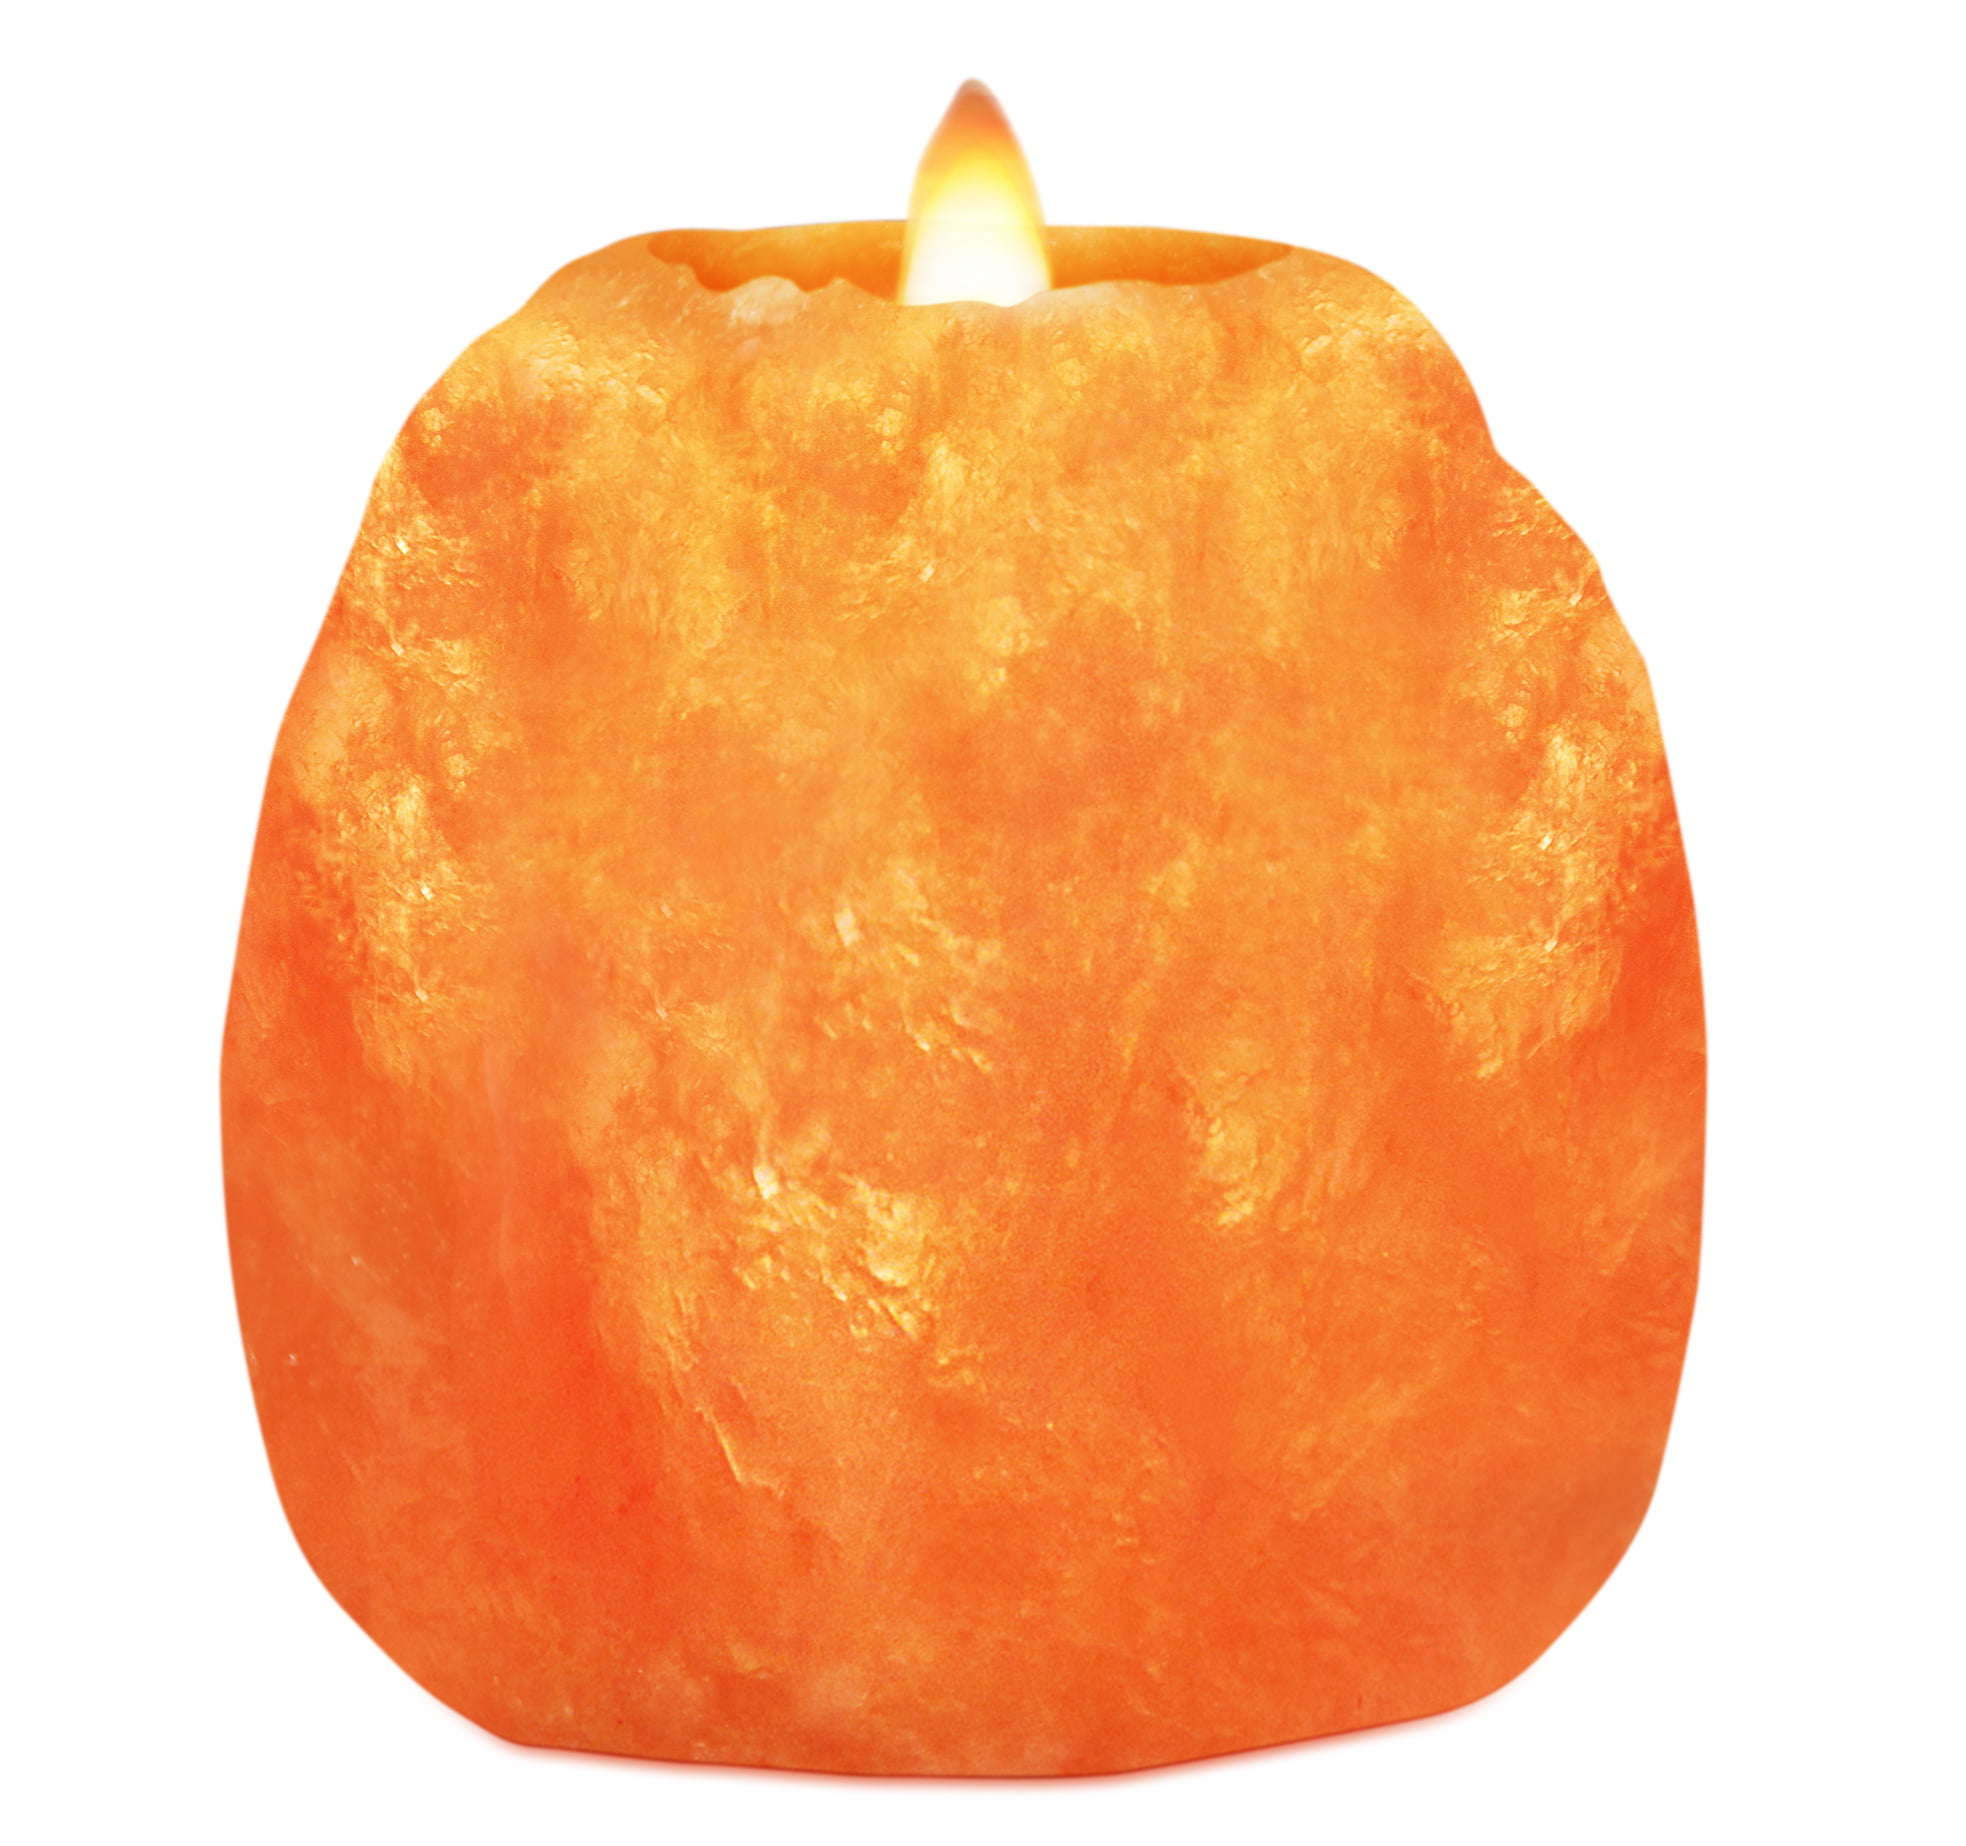 2 Natural Himalayan Rock Salt Candle Holder Buy one get one free 